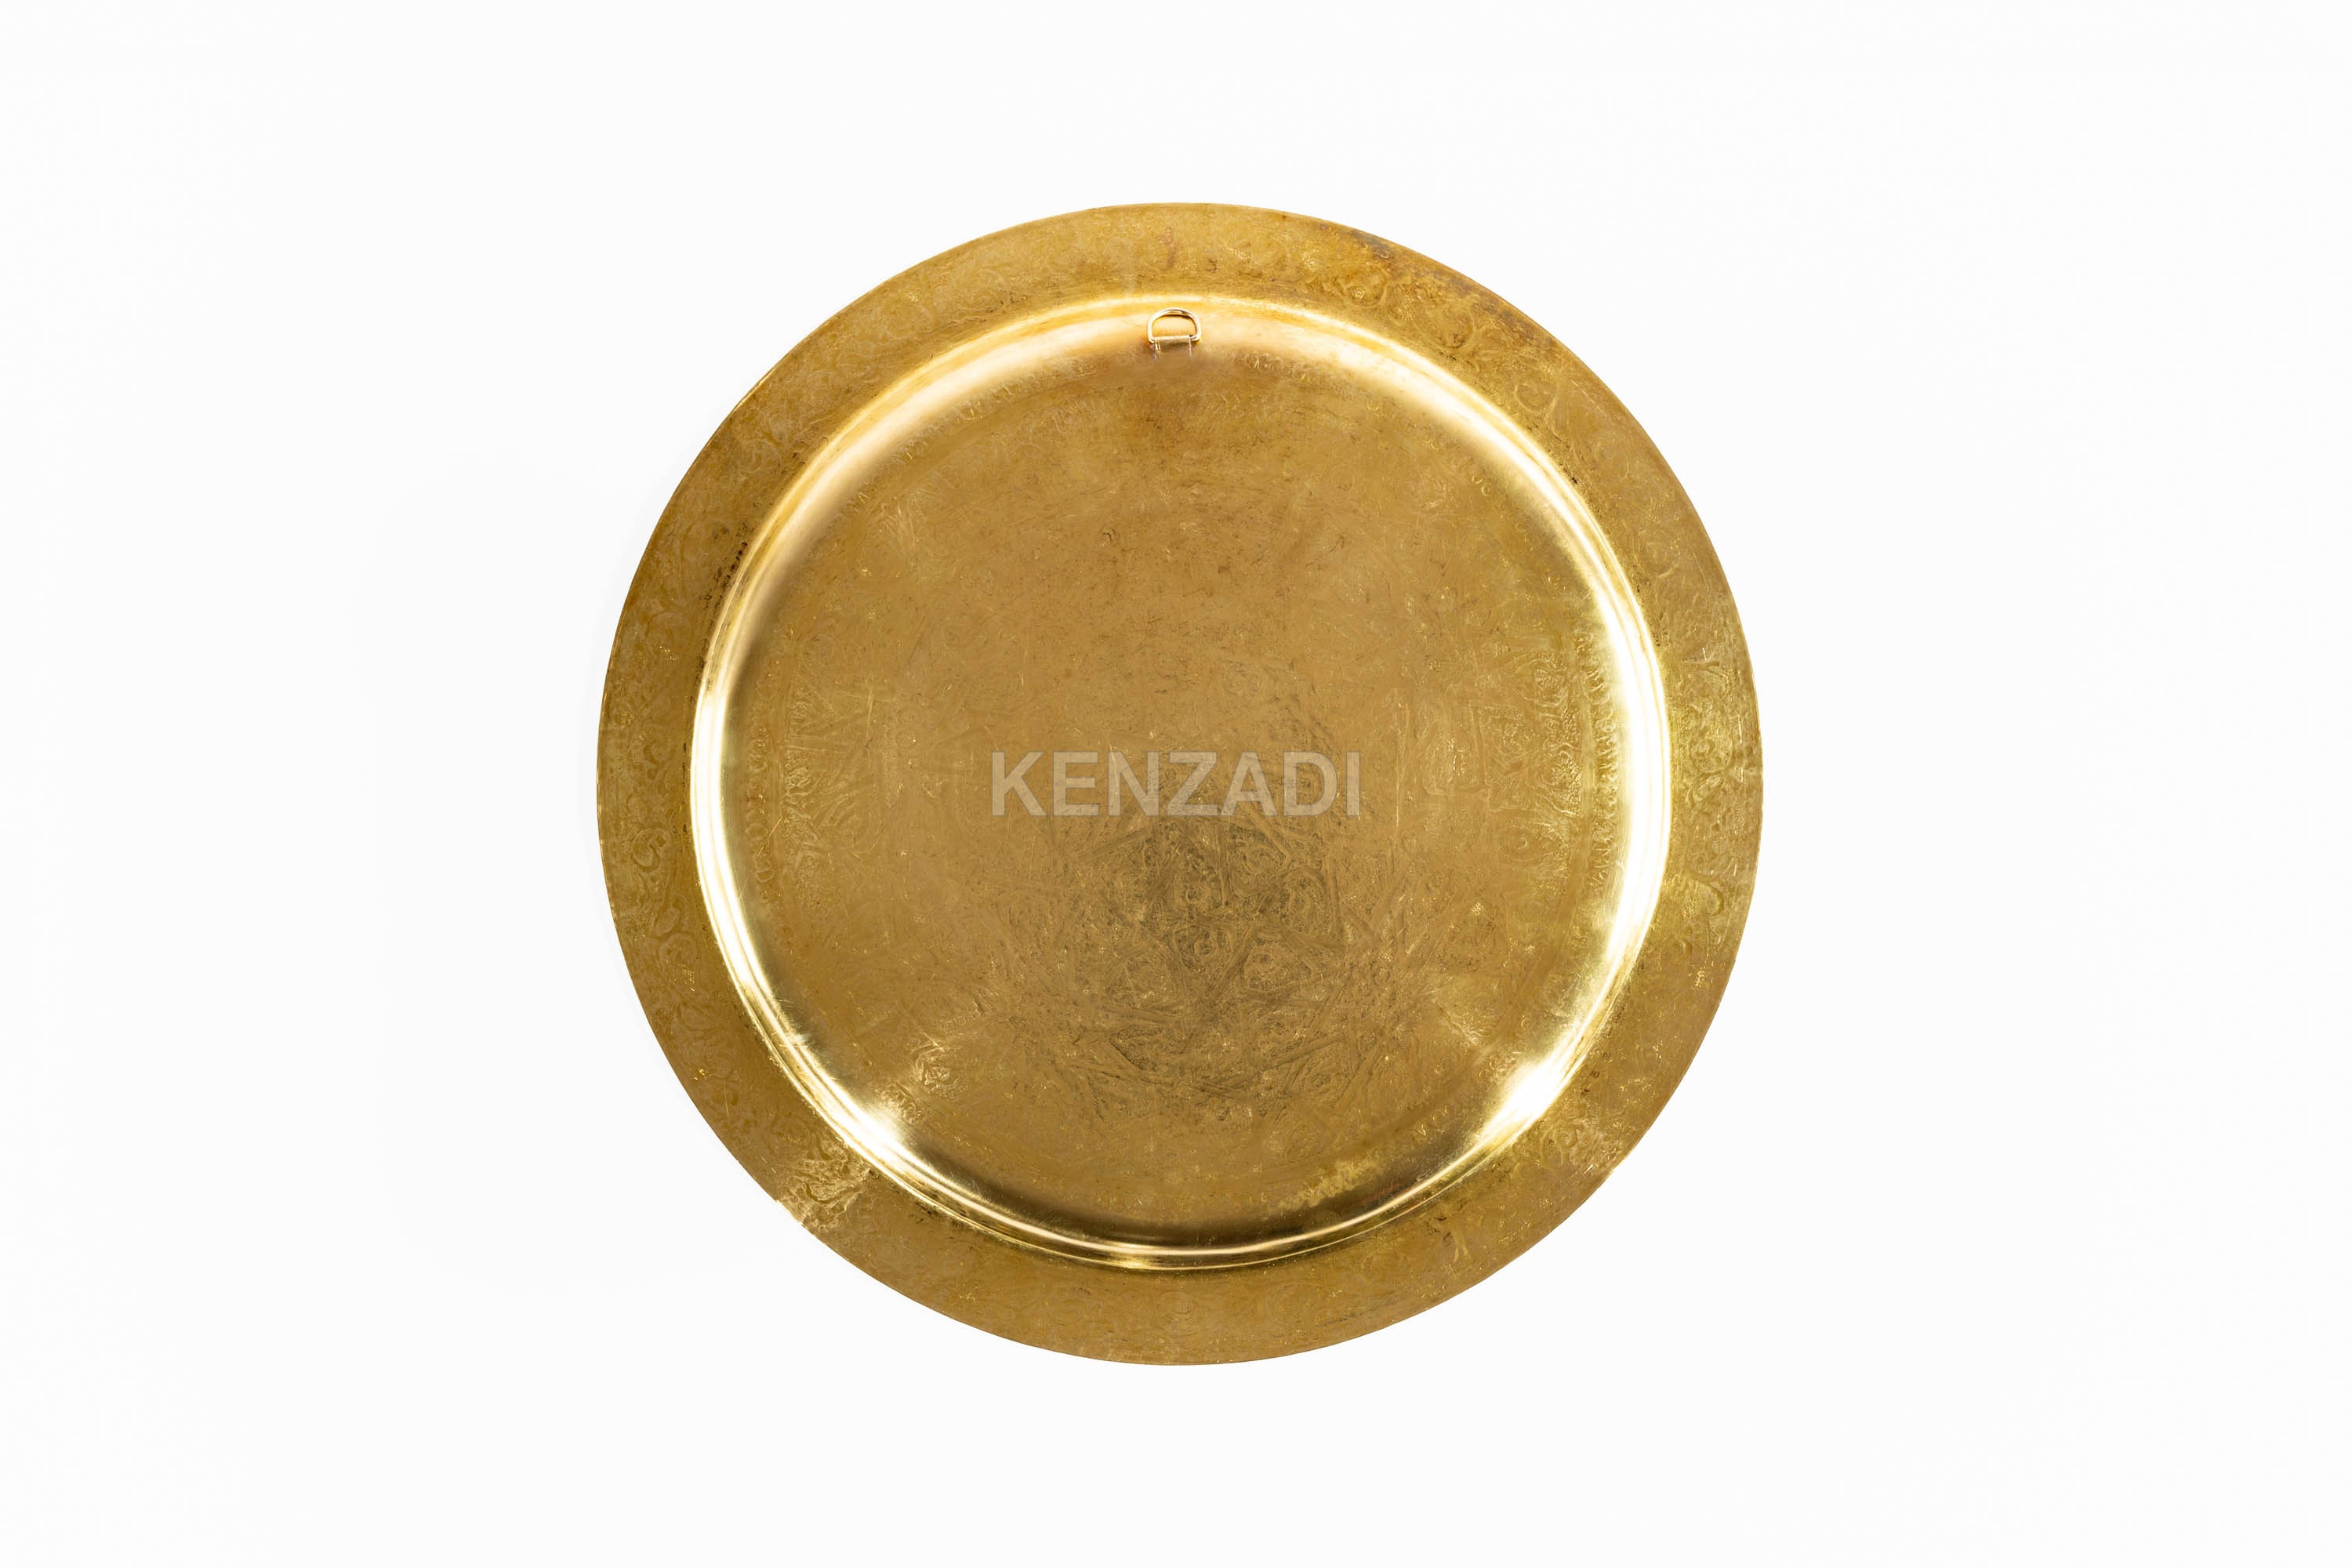 Moroccan Handmade Brass Tray Gold Colored Plated w/ Hanging ring From Fes Morocco African Marrakech Decor